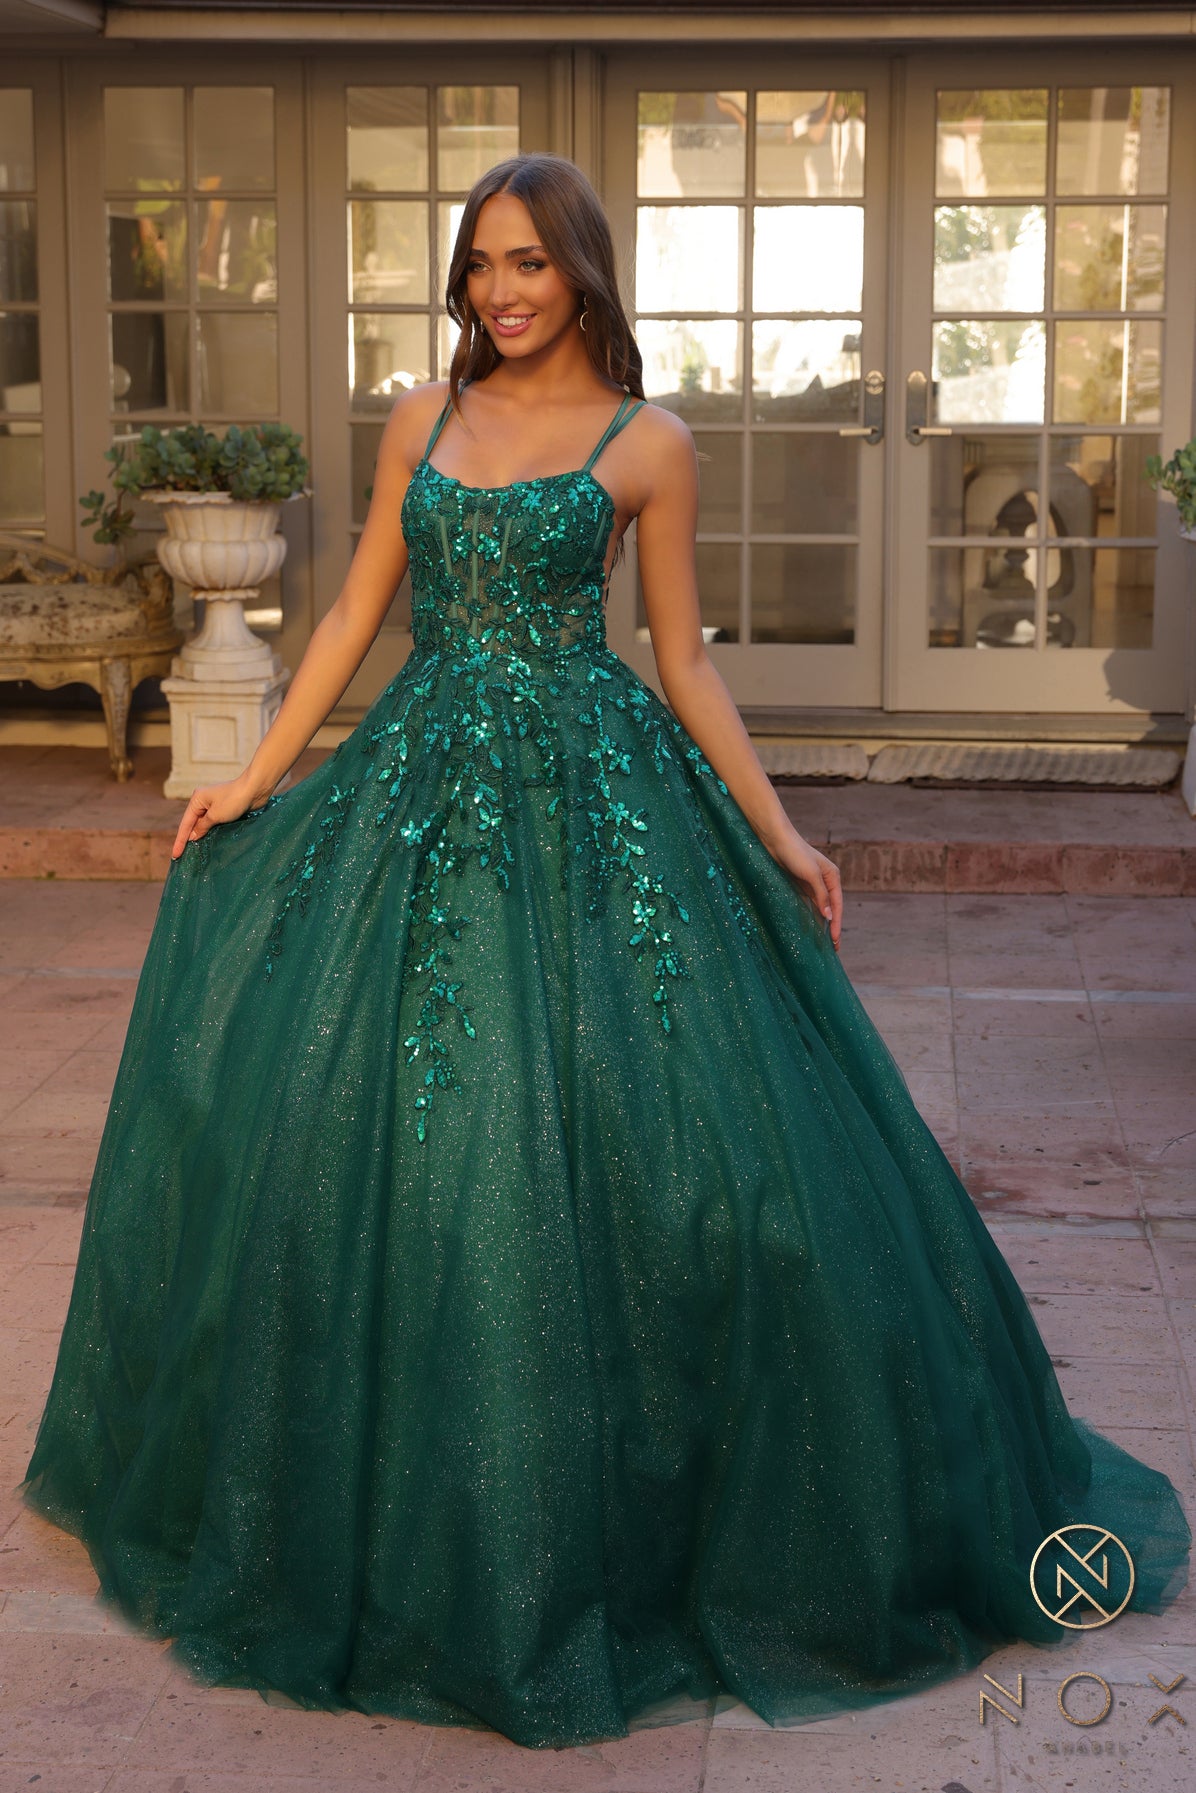 Elevate your prom night look with the Nox Anabel H1271 dress. This elegant A-line gown features a stunning shimmering tulle design with a sheer sequin corset and a flattering scoop neck. Perfect for making a statement with a touch of glamour.  Sizes: 00-16  Colors: Green, Fuchsia, Lavender